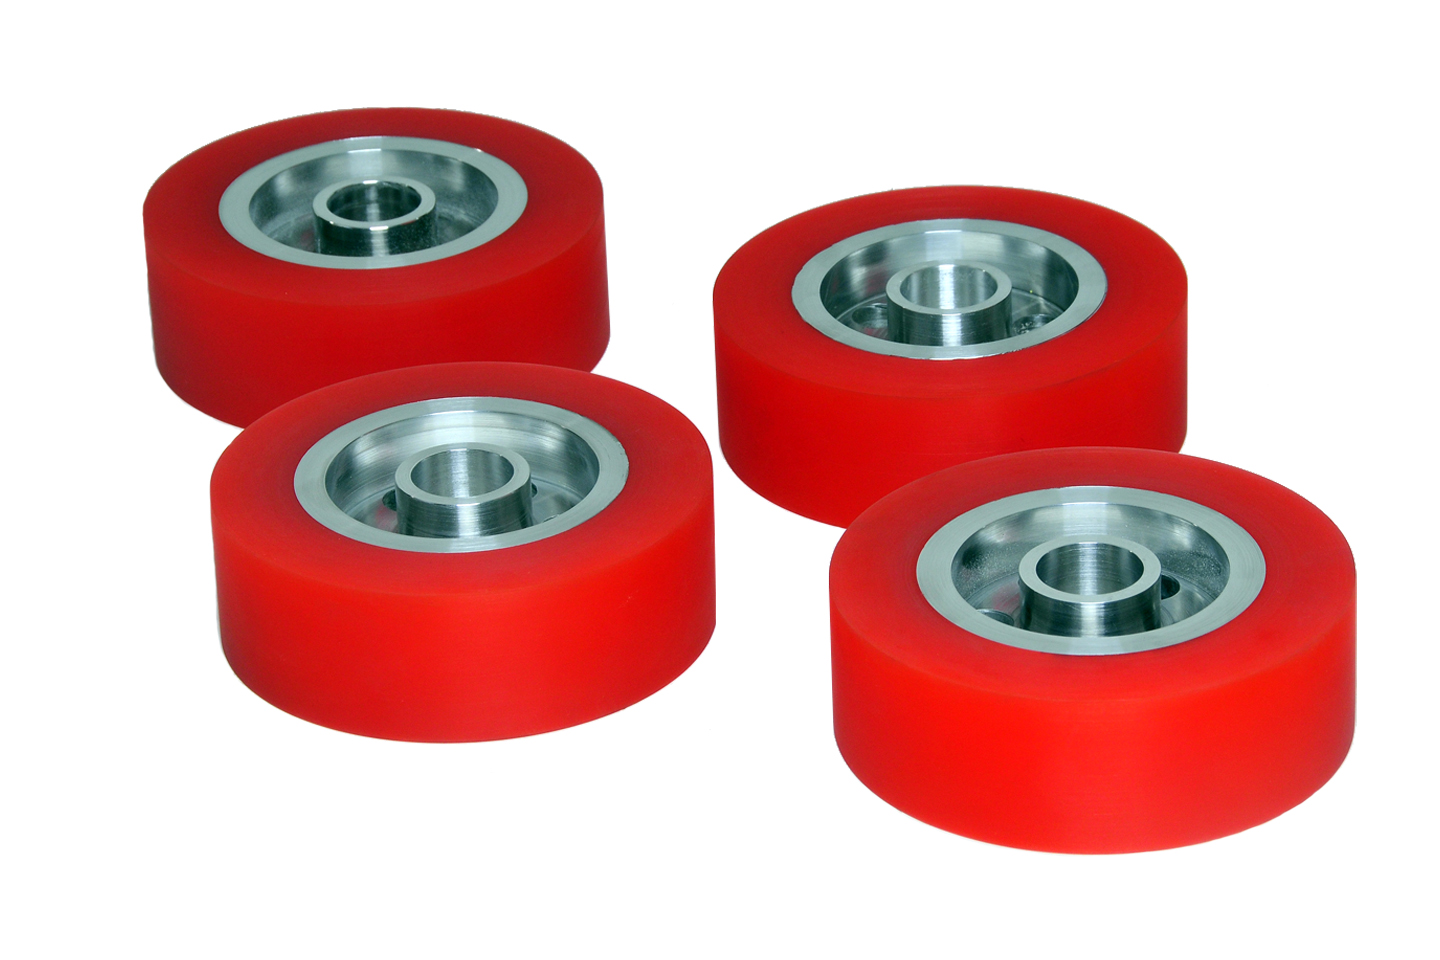 Wheels made from various materials